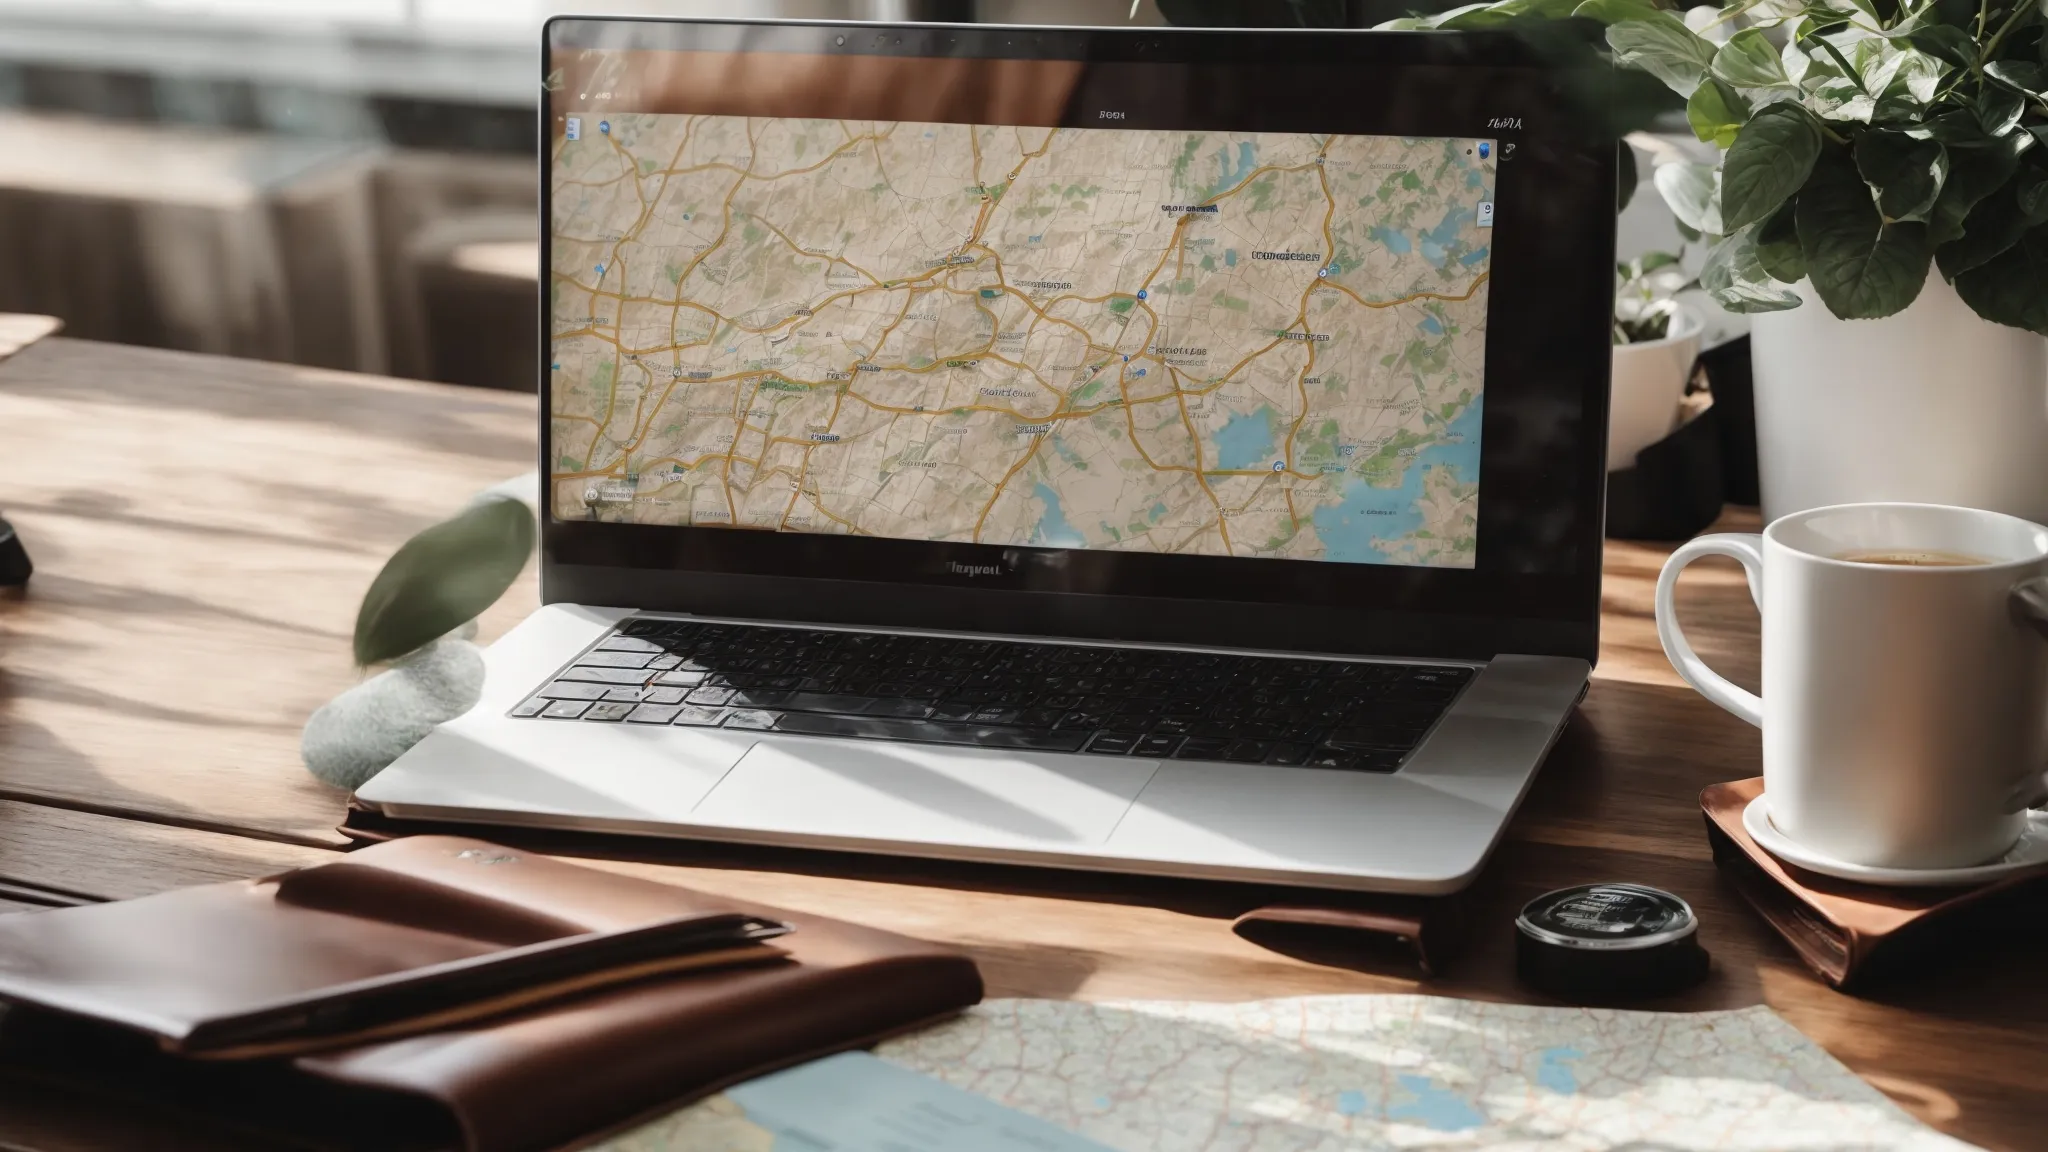 a laptop with a map and location pins on its screen sits on a desk next to a cup of coffee, conveying a local seo planning session.